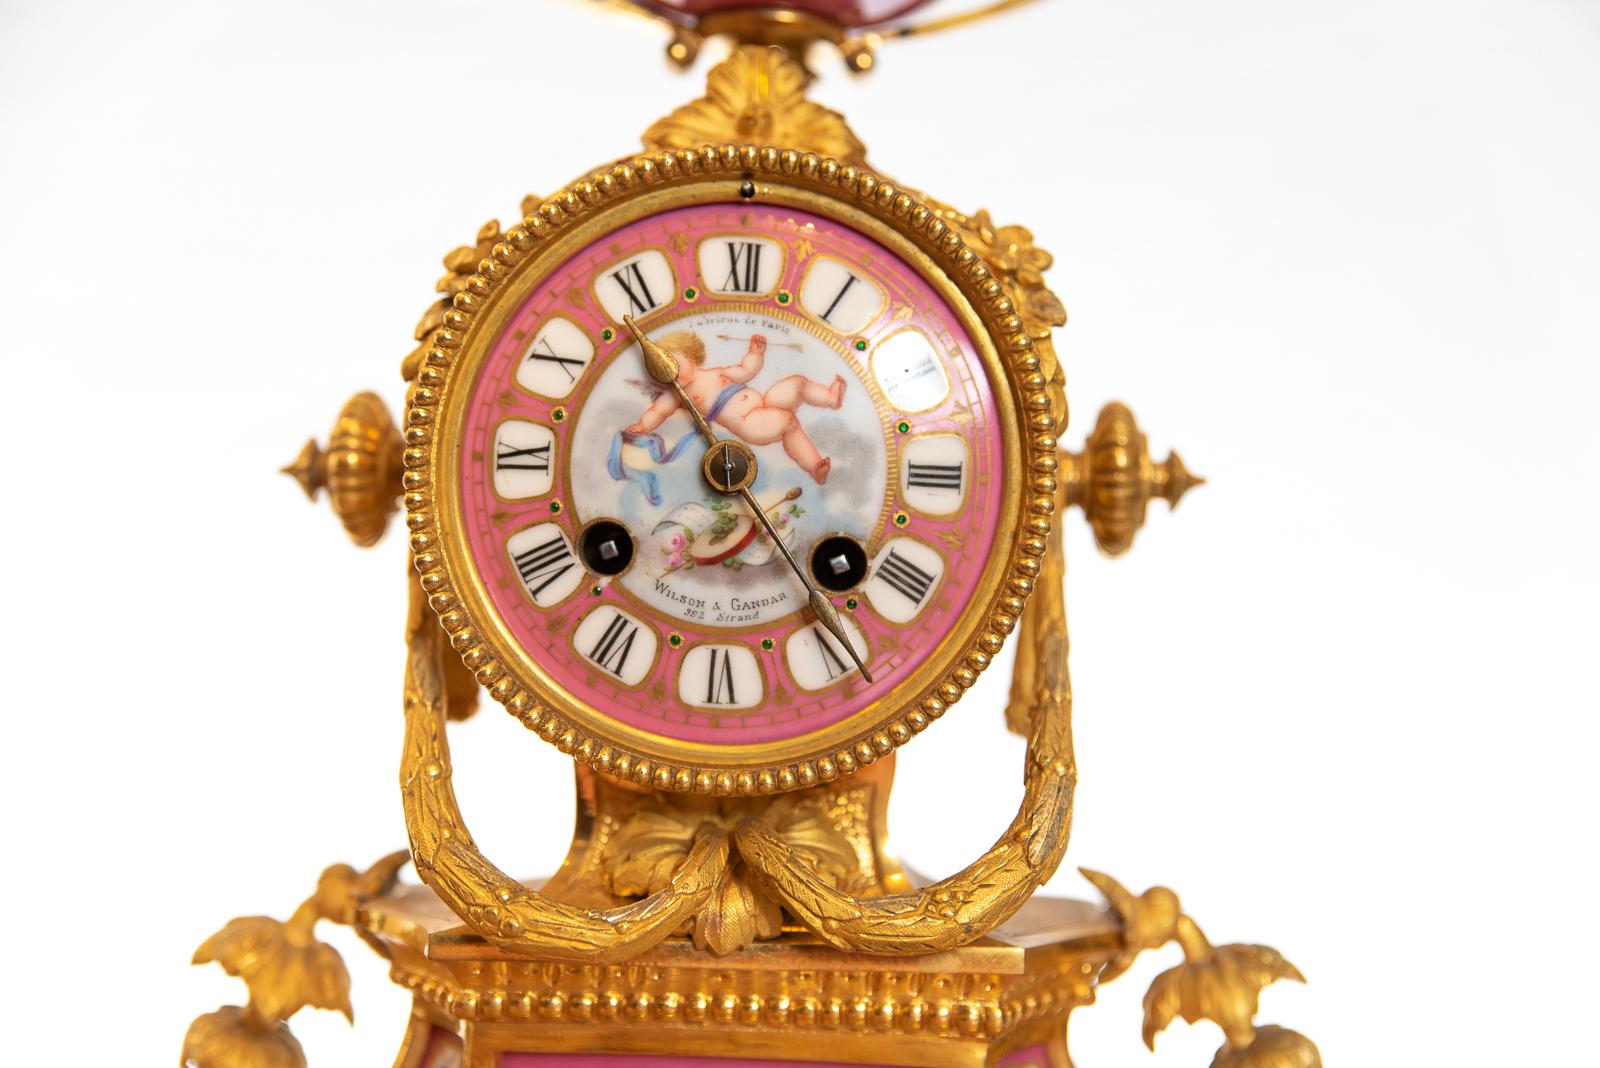 A late 19th century 8 day hour and half hour striking the hours on a single bell mantel clock. With pink porcelain hand painted panels depicting romance and lovers. The enamel dial is signed by the original retailers Wilson & Gandar of 392 the